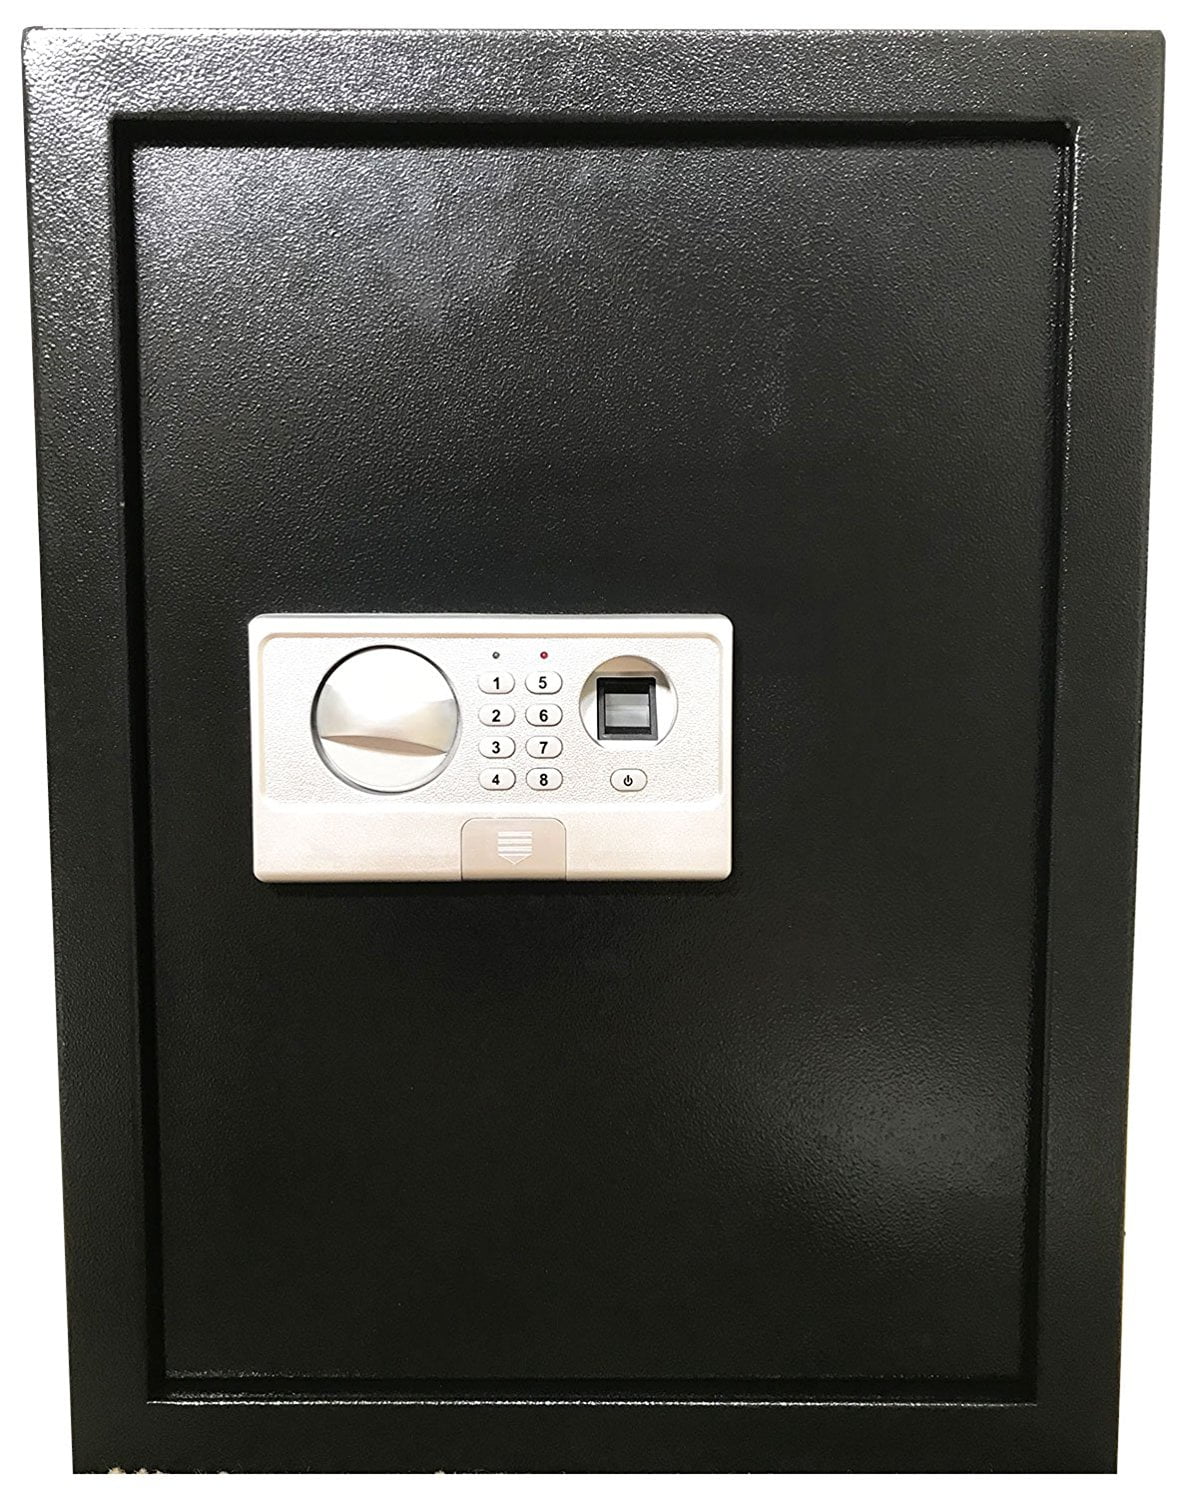 Volibel Gun Safe Box Security Safe Lock Box with Fingerprint, Code, App and Key for Home and Office(No Battery Include)